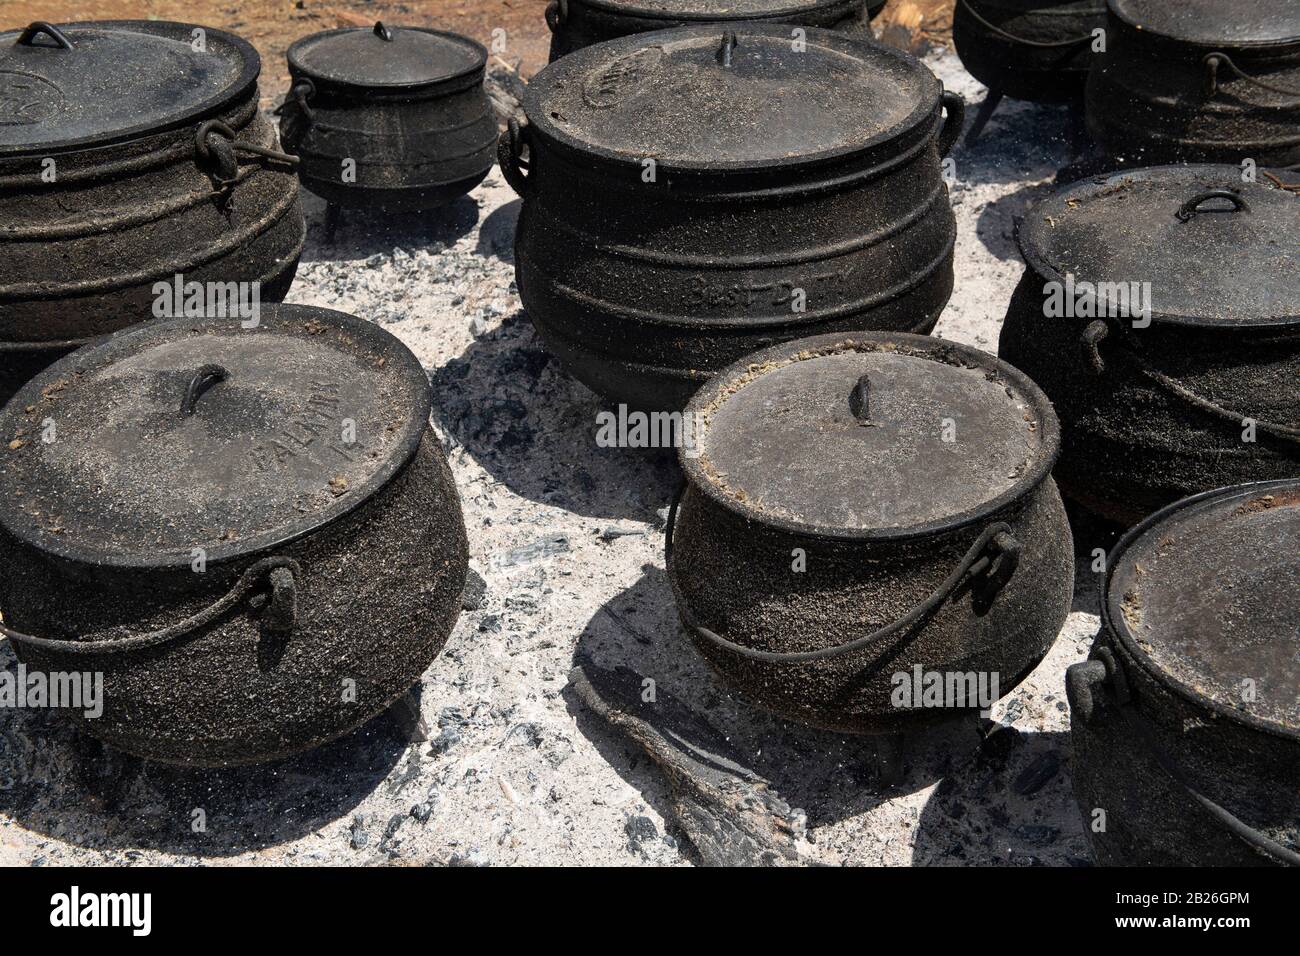 https://c8.alamy.com/comp/2B26GPM/cast-iron-potjie-pots-on-a-fire-in-the-village-near-pitseng-leribe-lesotho-2B26GPM.jpg